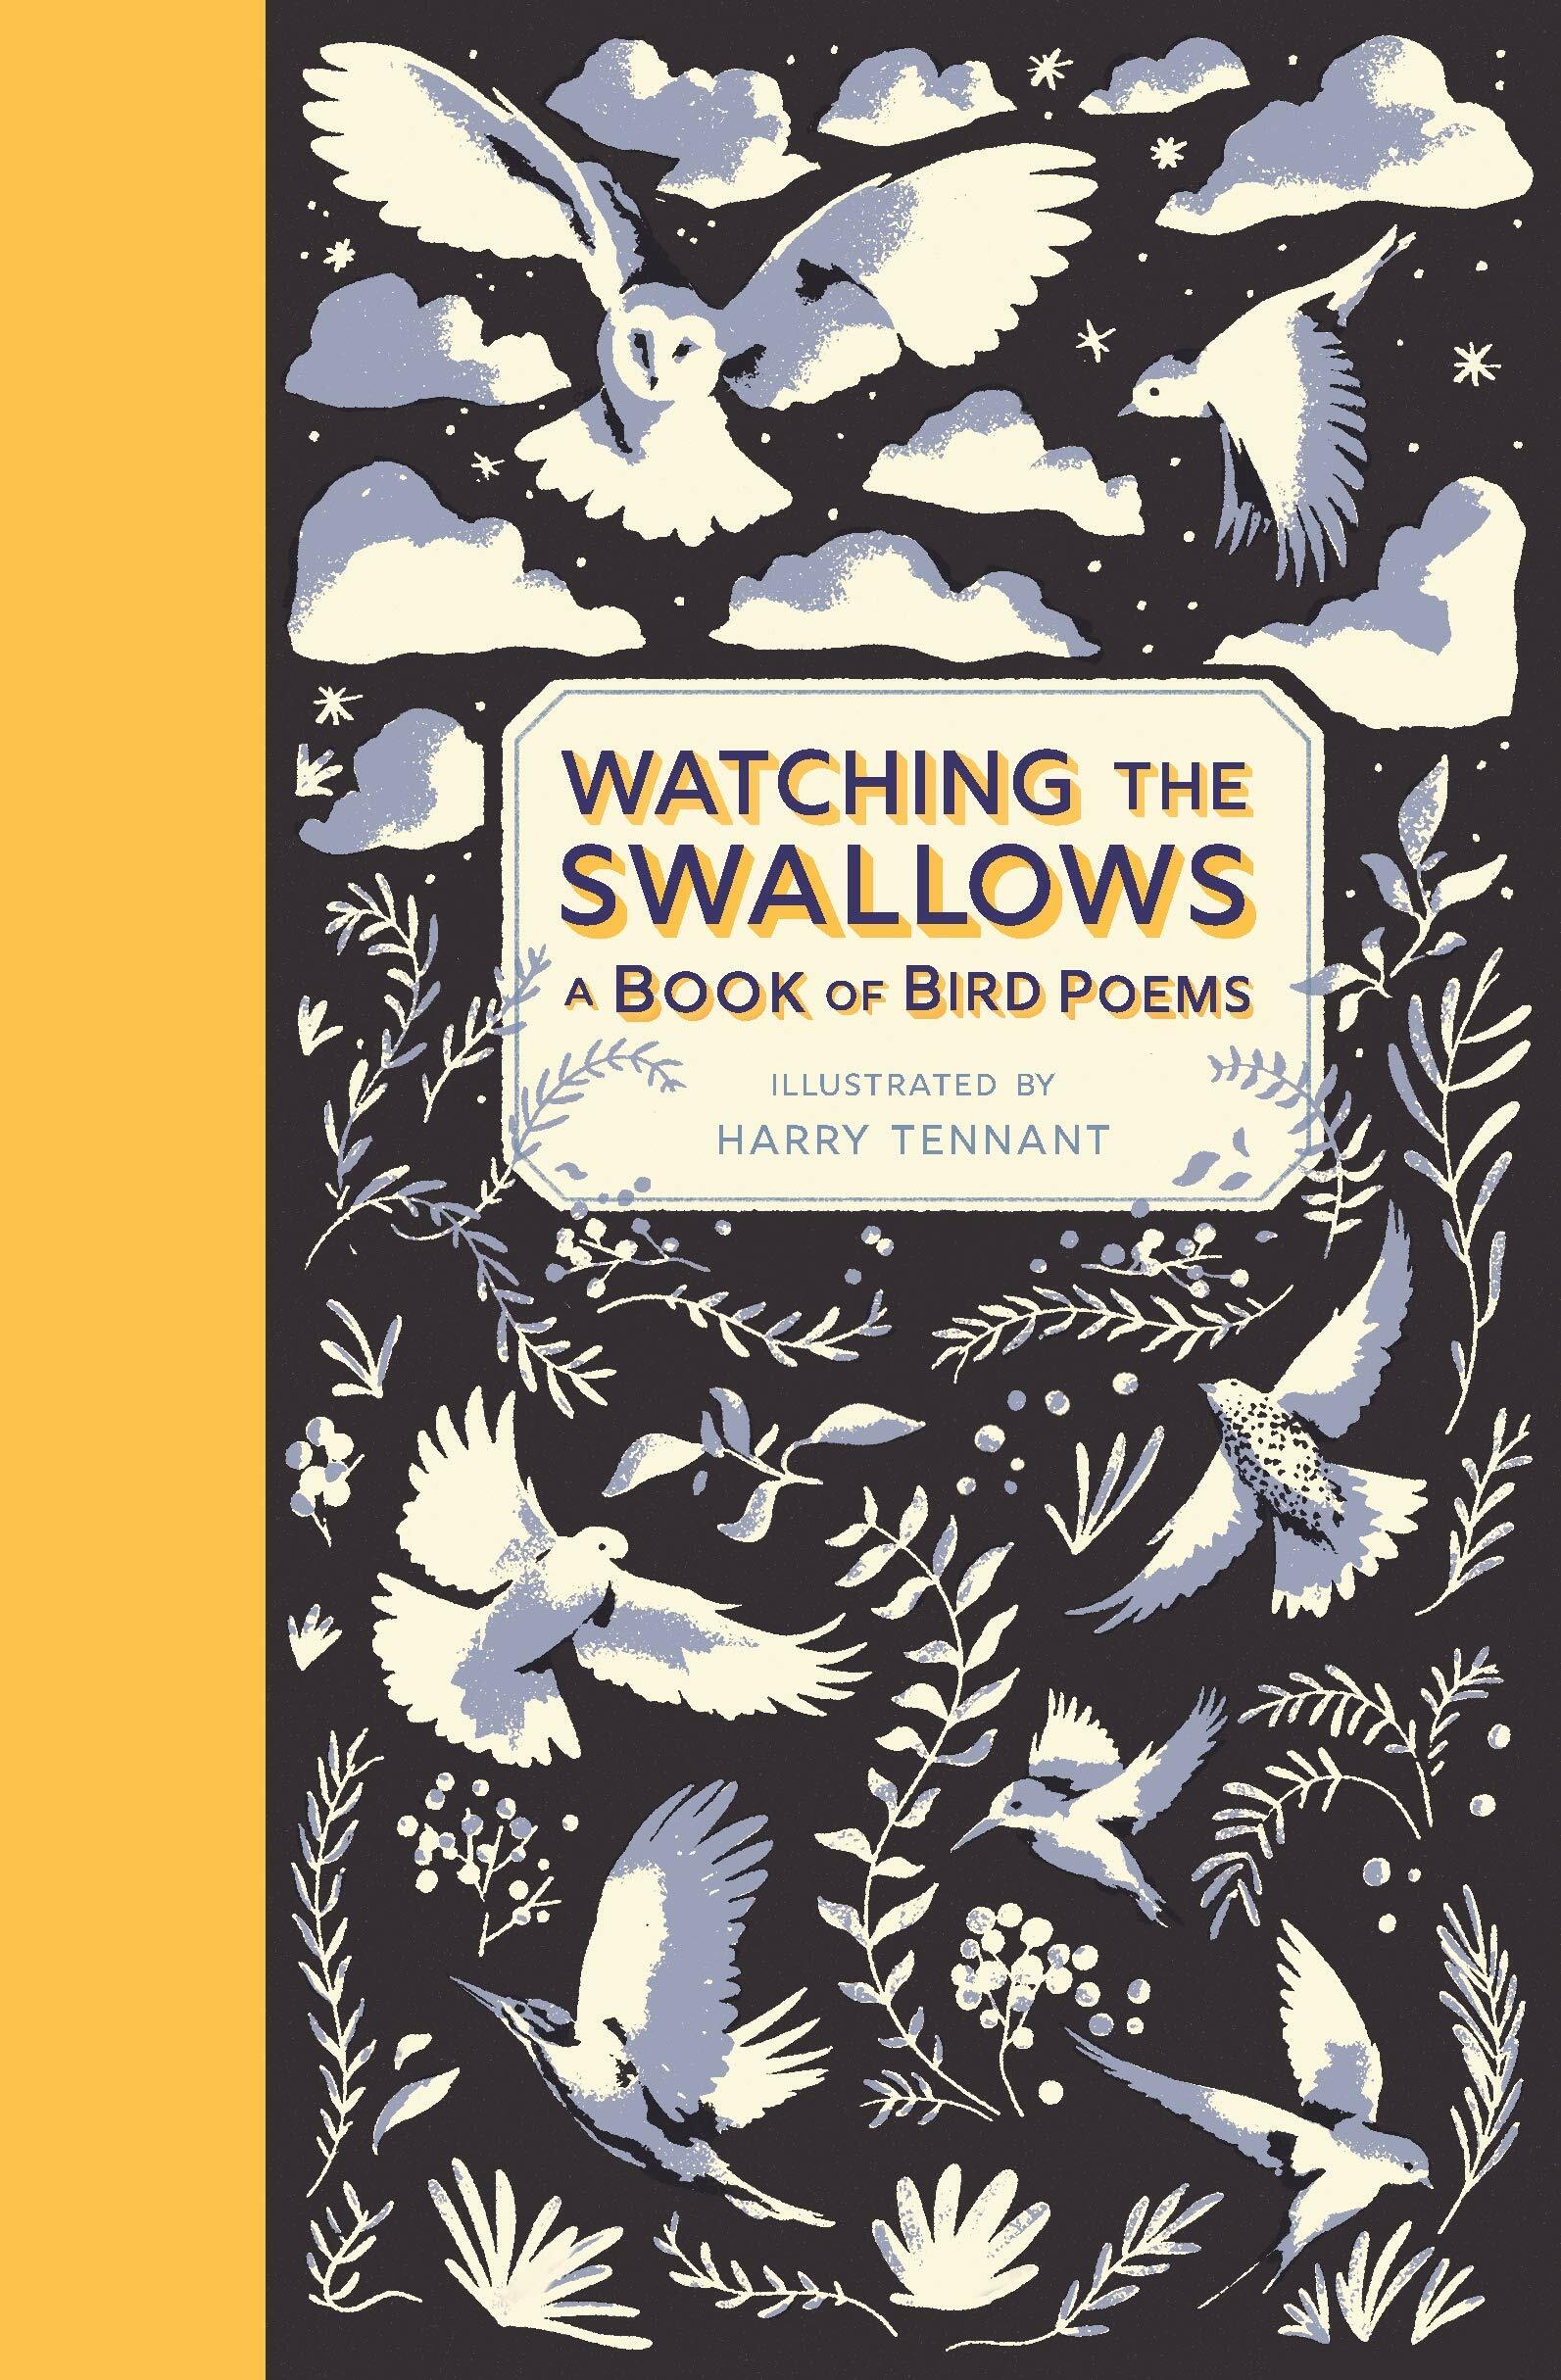 Watching the Swallows: A Book of Bird Poems (Hardcover)